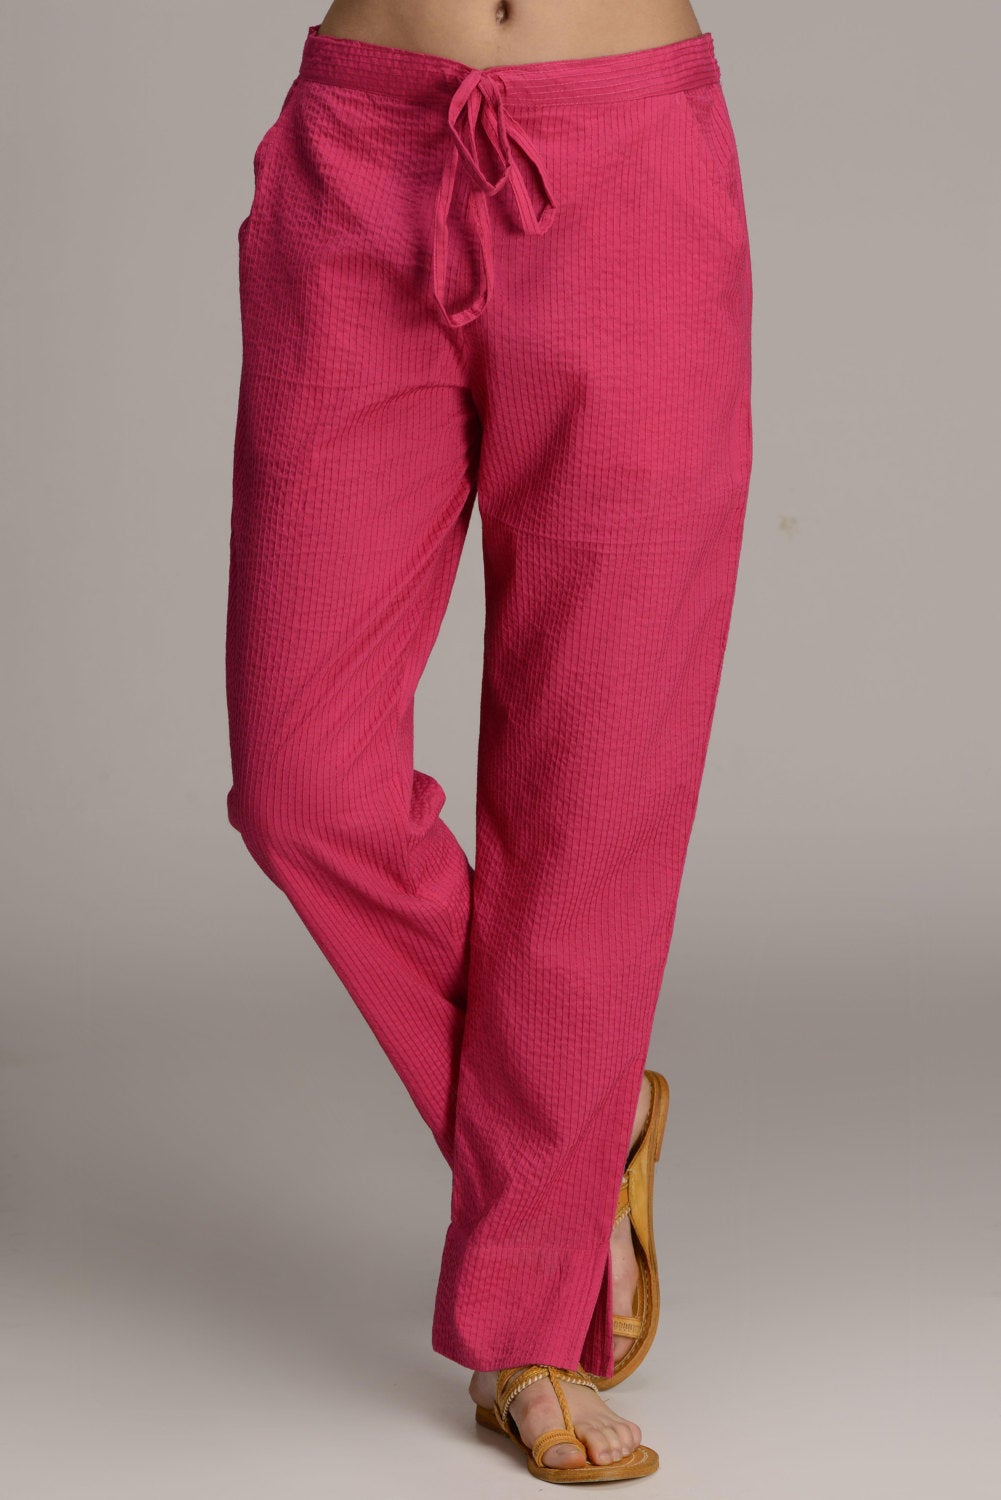 Self embroided cotton straight pants in hot pink colour - KanisaCrafts